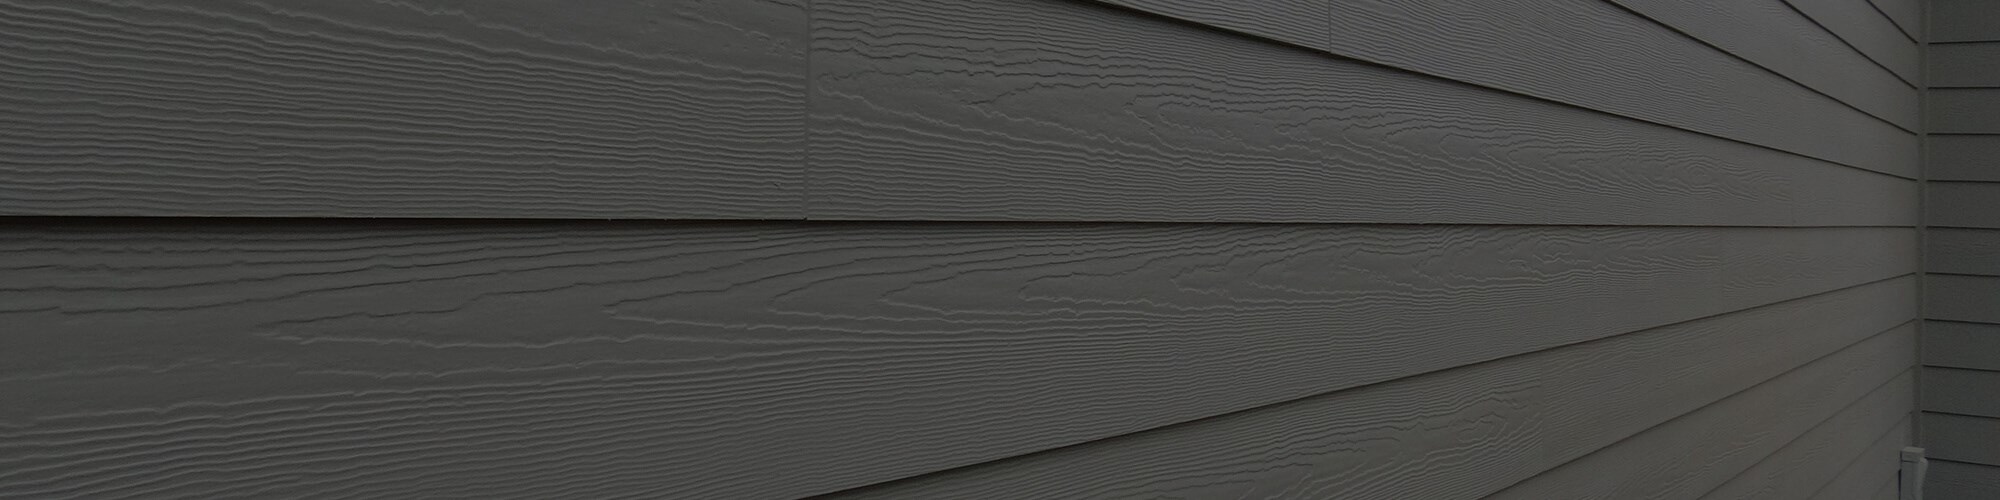 siding installation in plymouth ma